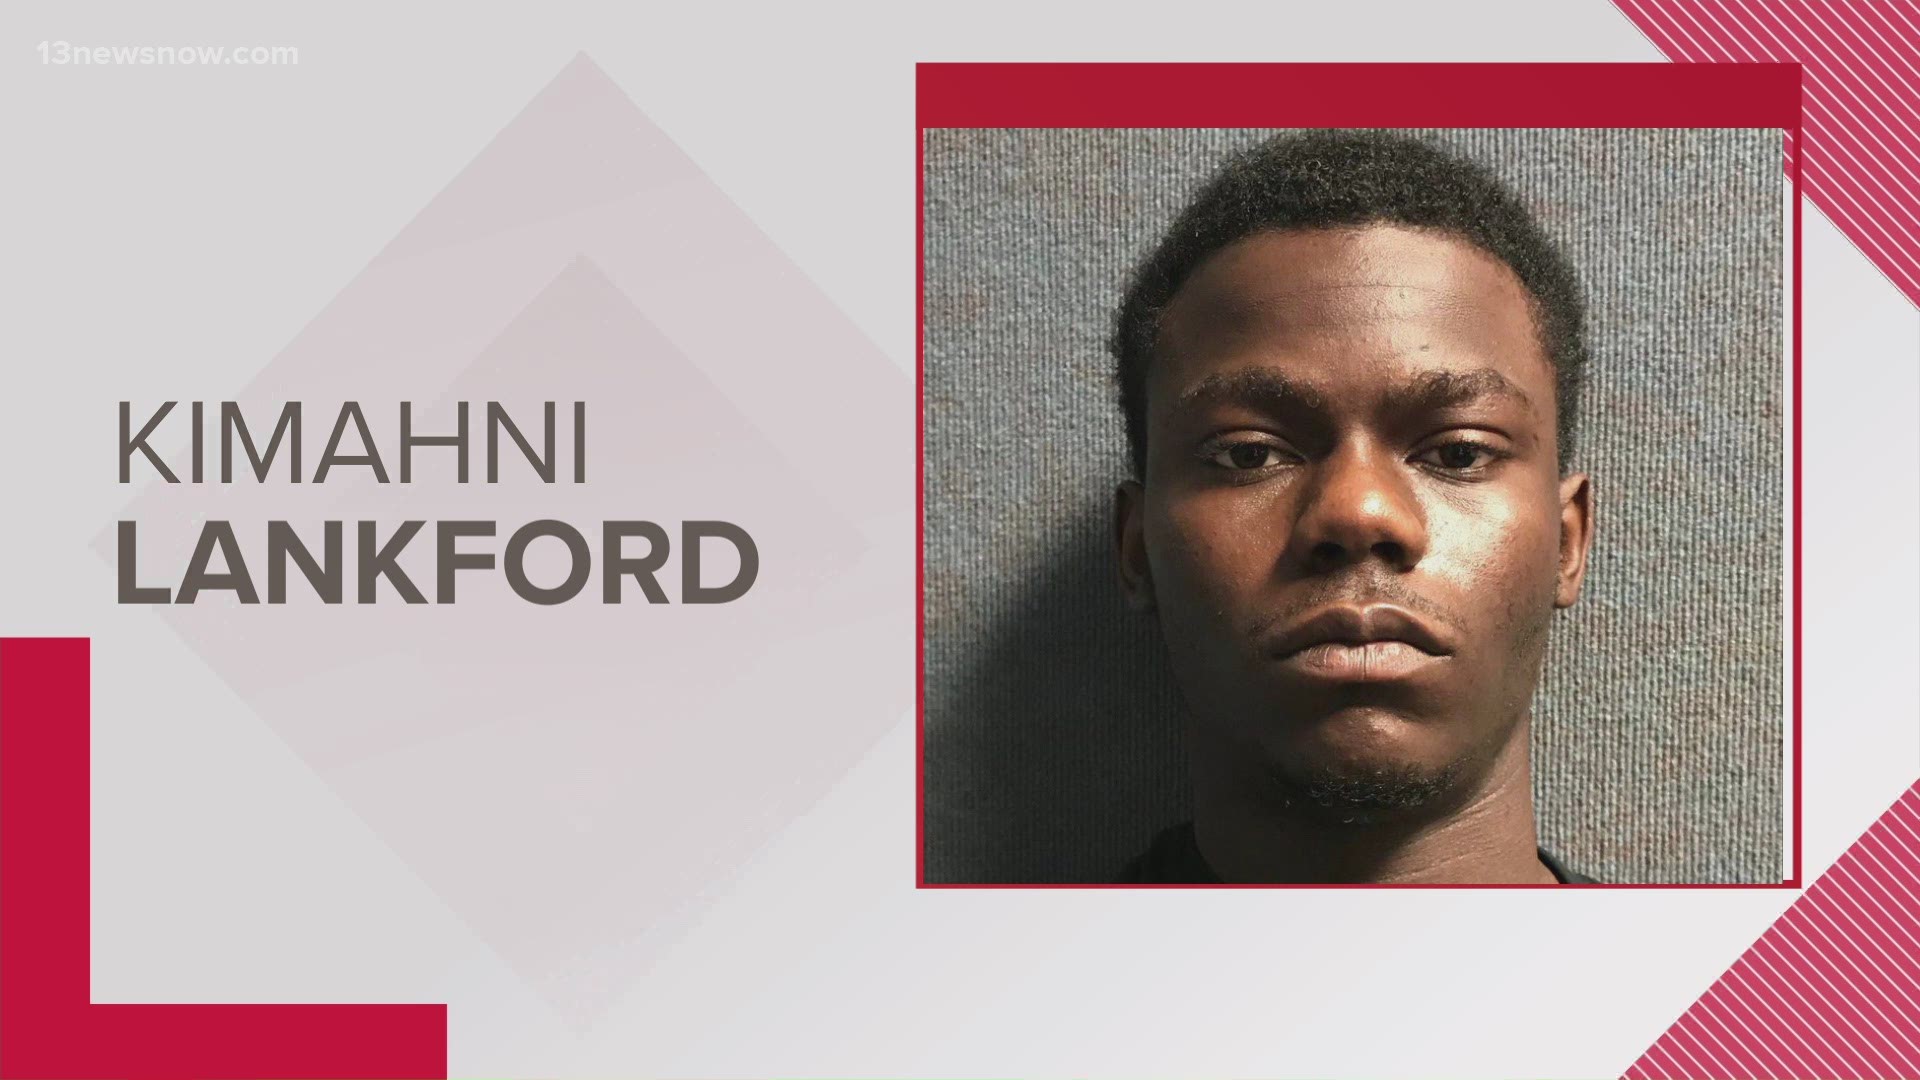 Police said Norfolk resident Kimahni Lankford, 20, will face five counts of malicious wounding, and five counts of use of a firearm.